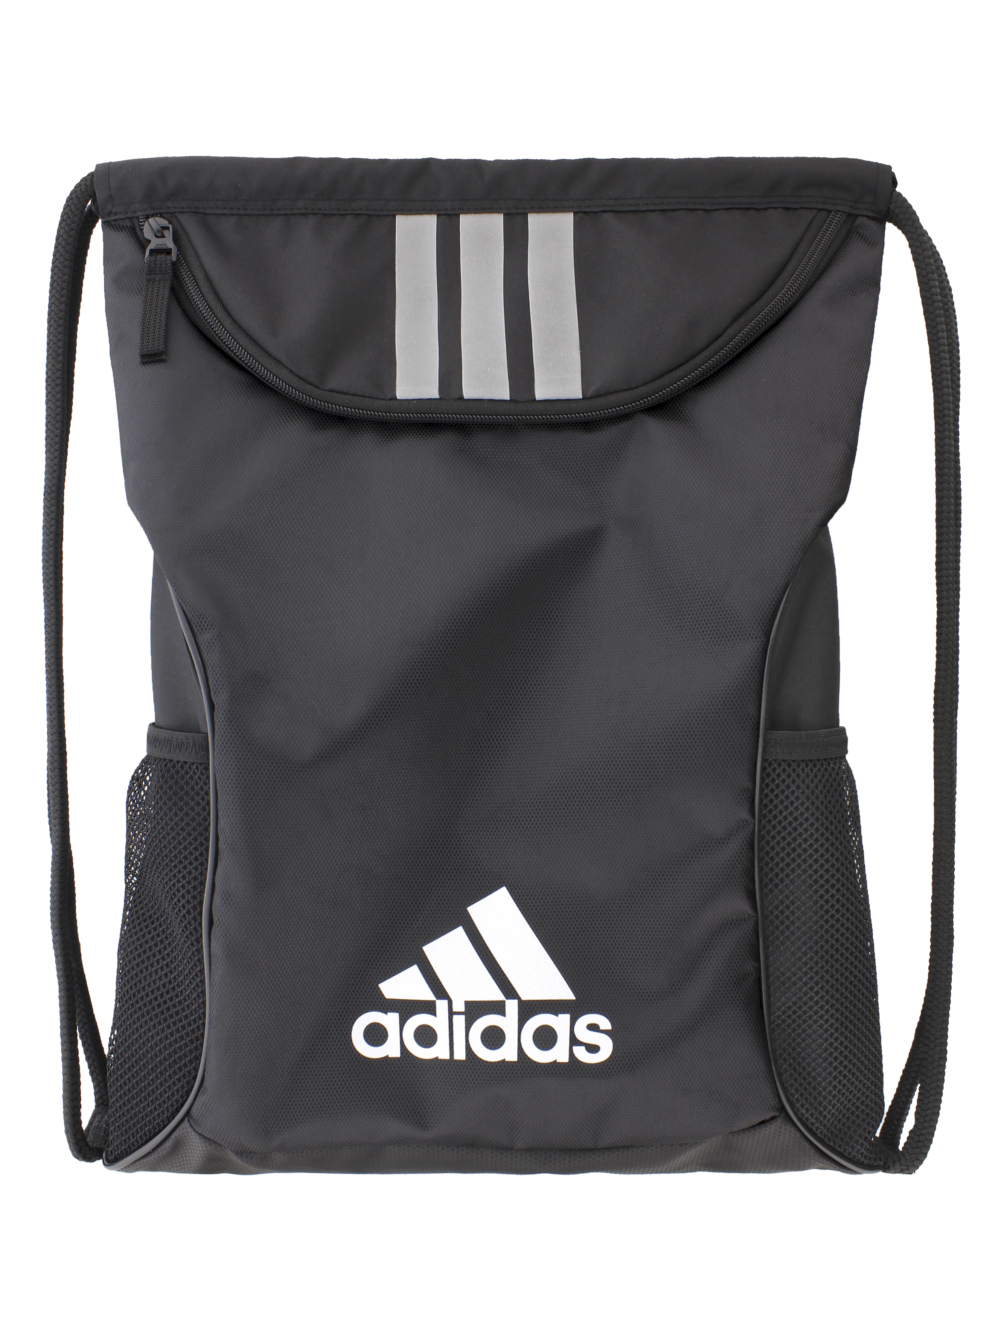 Adidas Team Issue Sling Bag | Midwest 